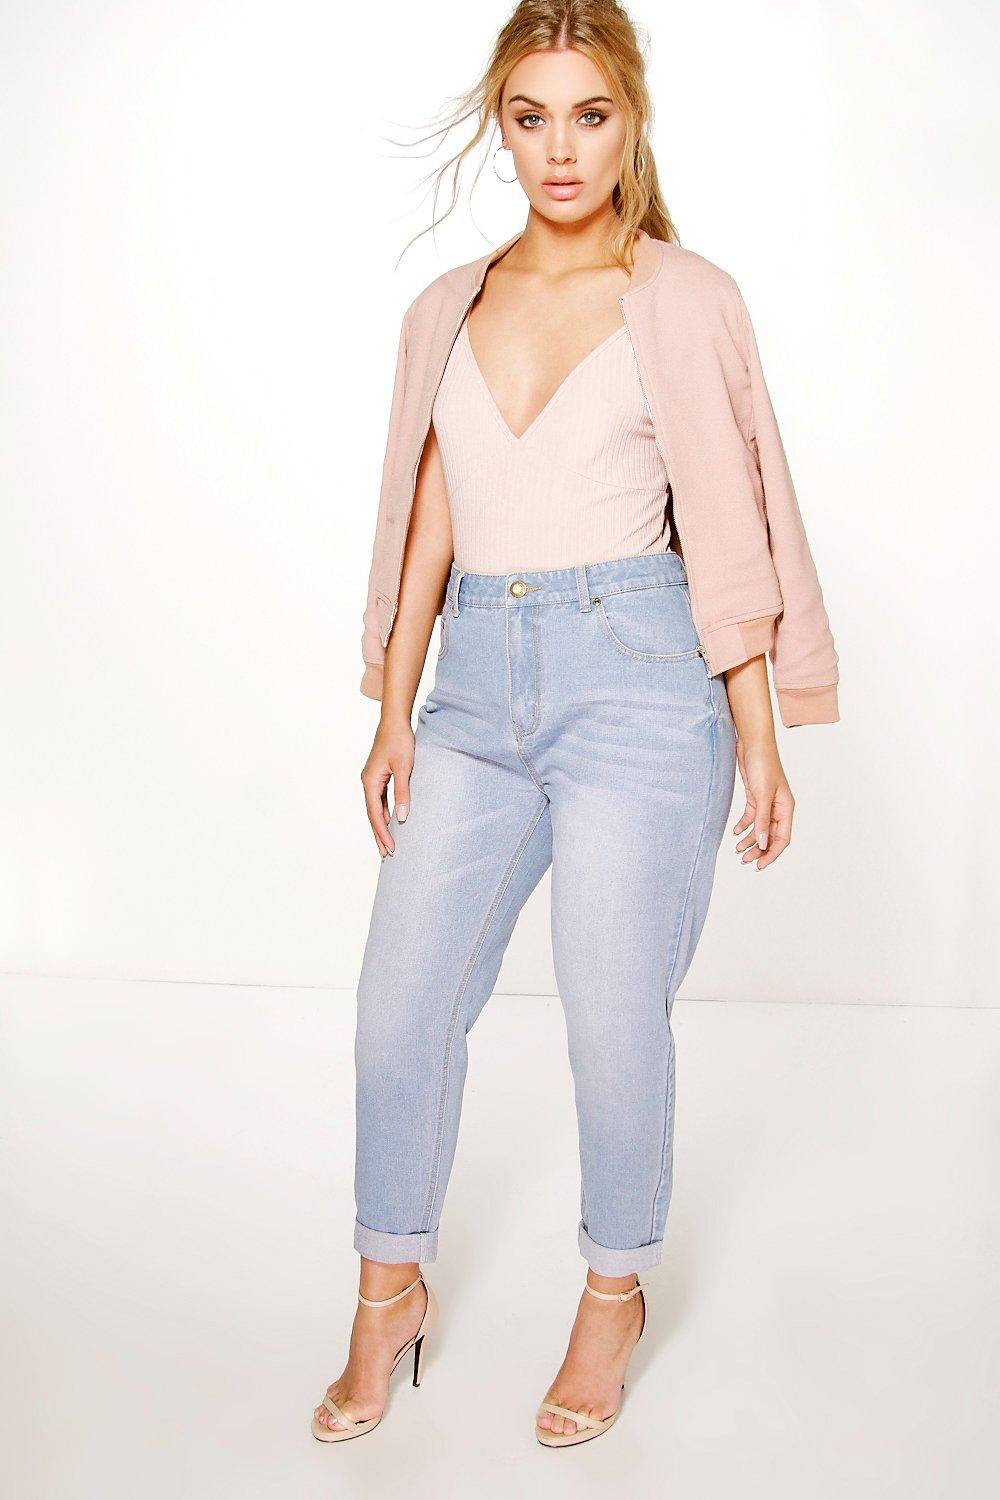 plus size high waisted jeans uk